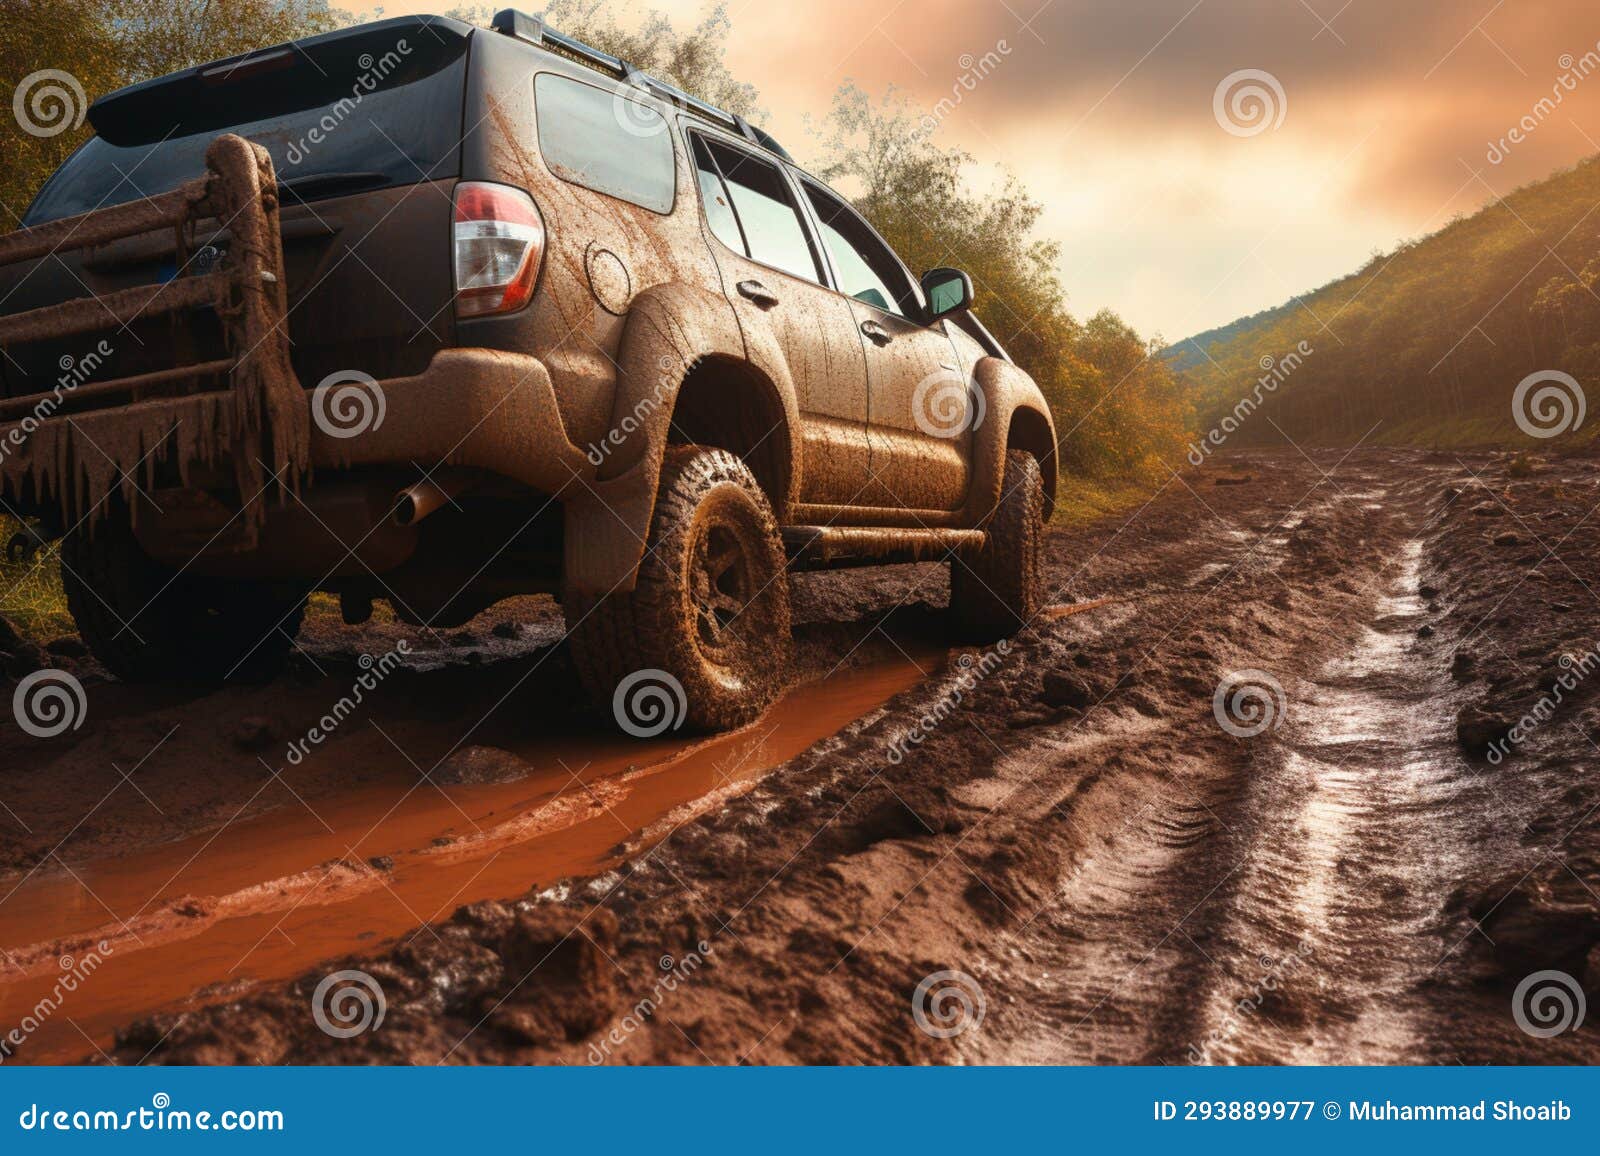 a dirt covered suv conquers a rural road with its offroad tires